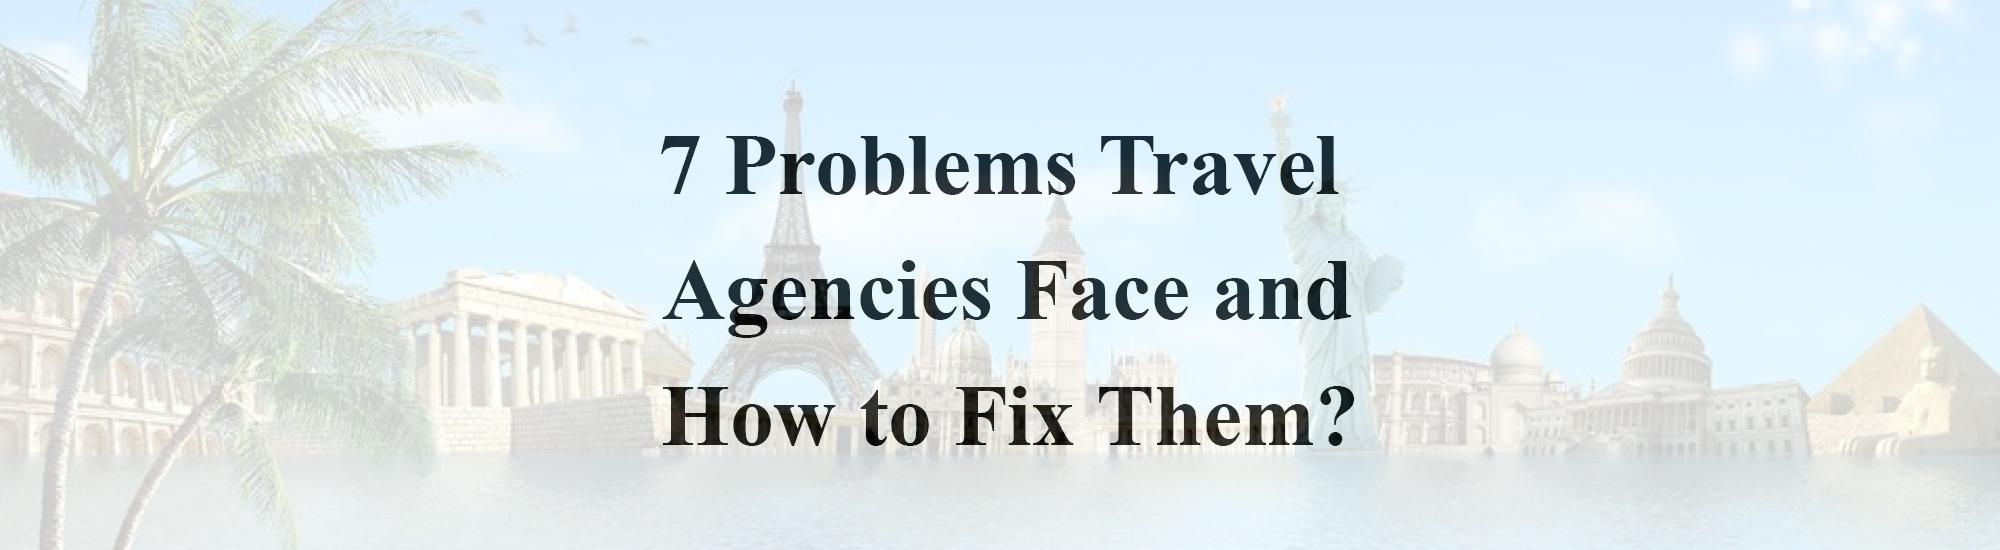 problems Travel Agencies face